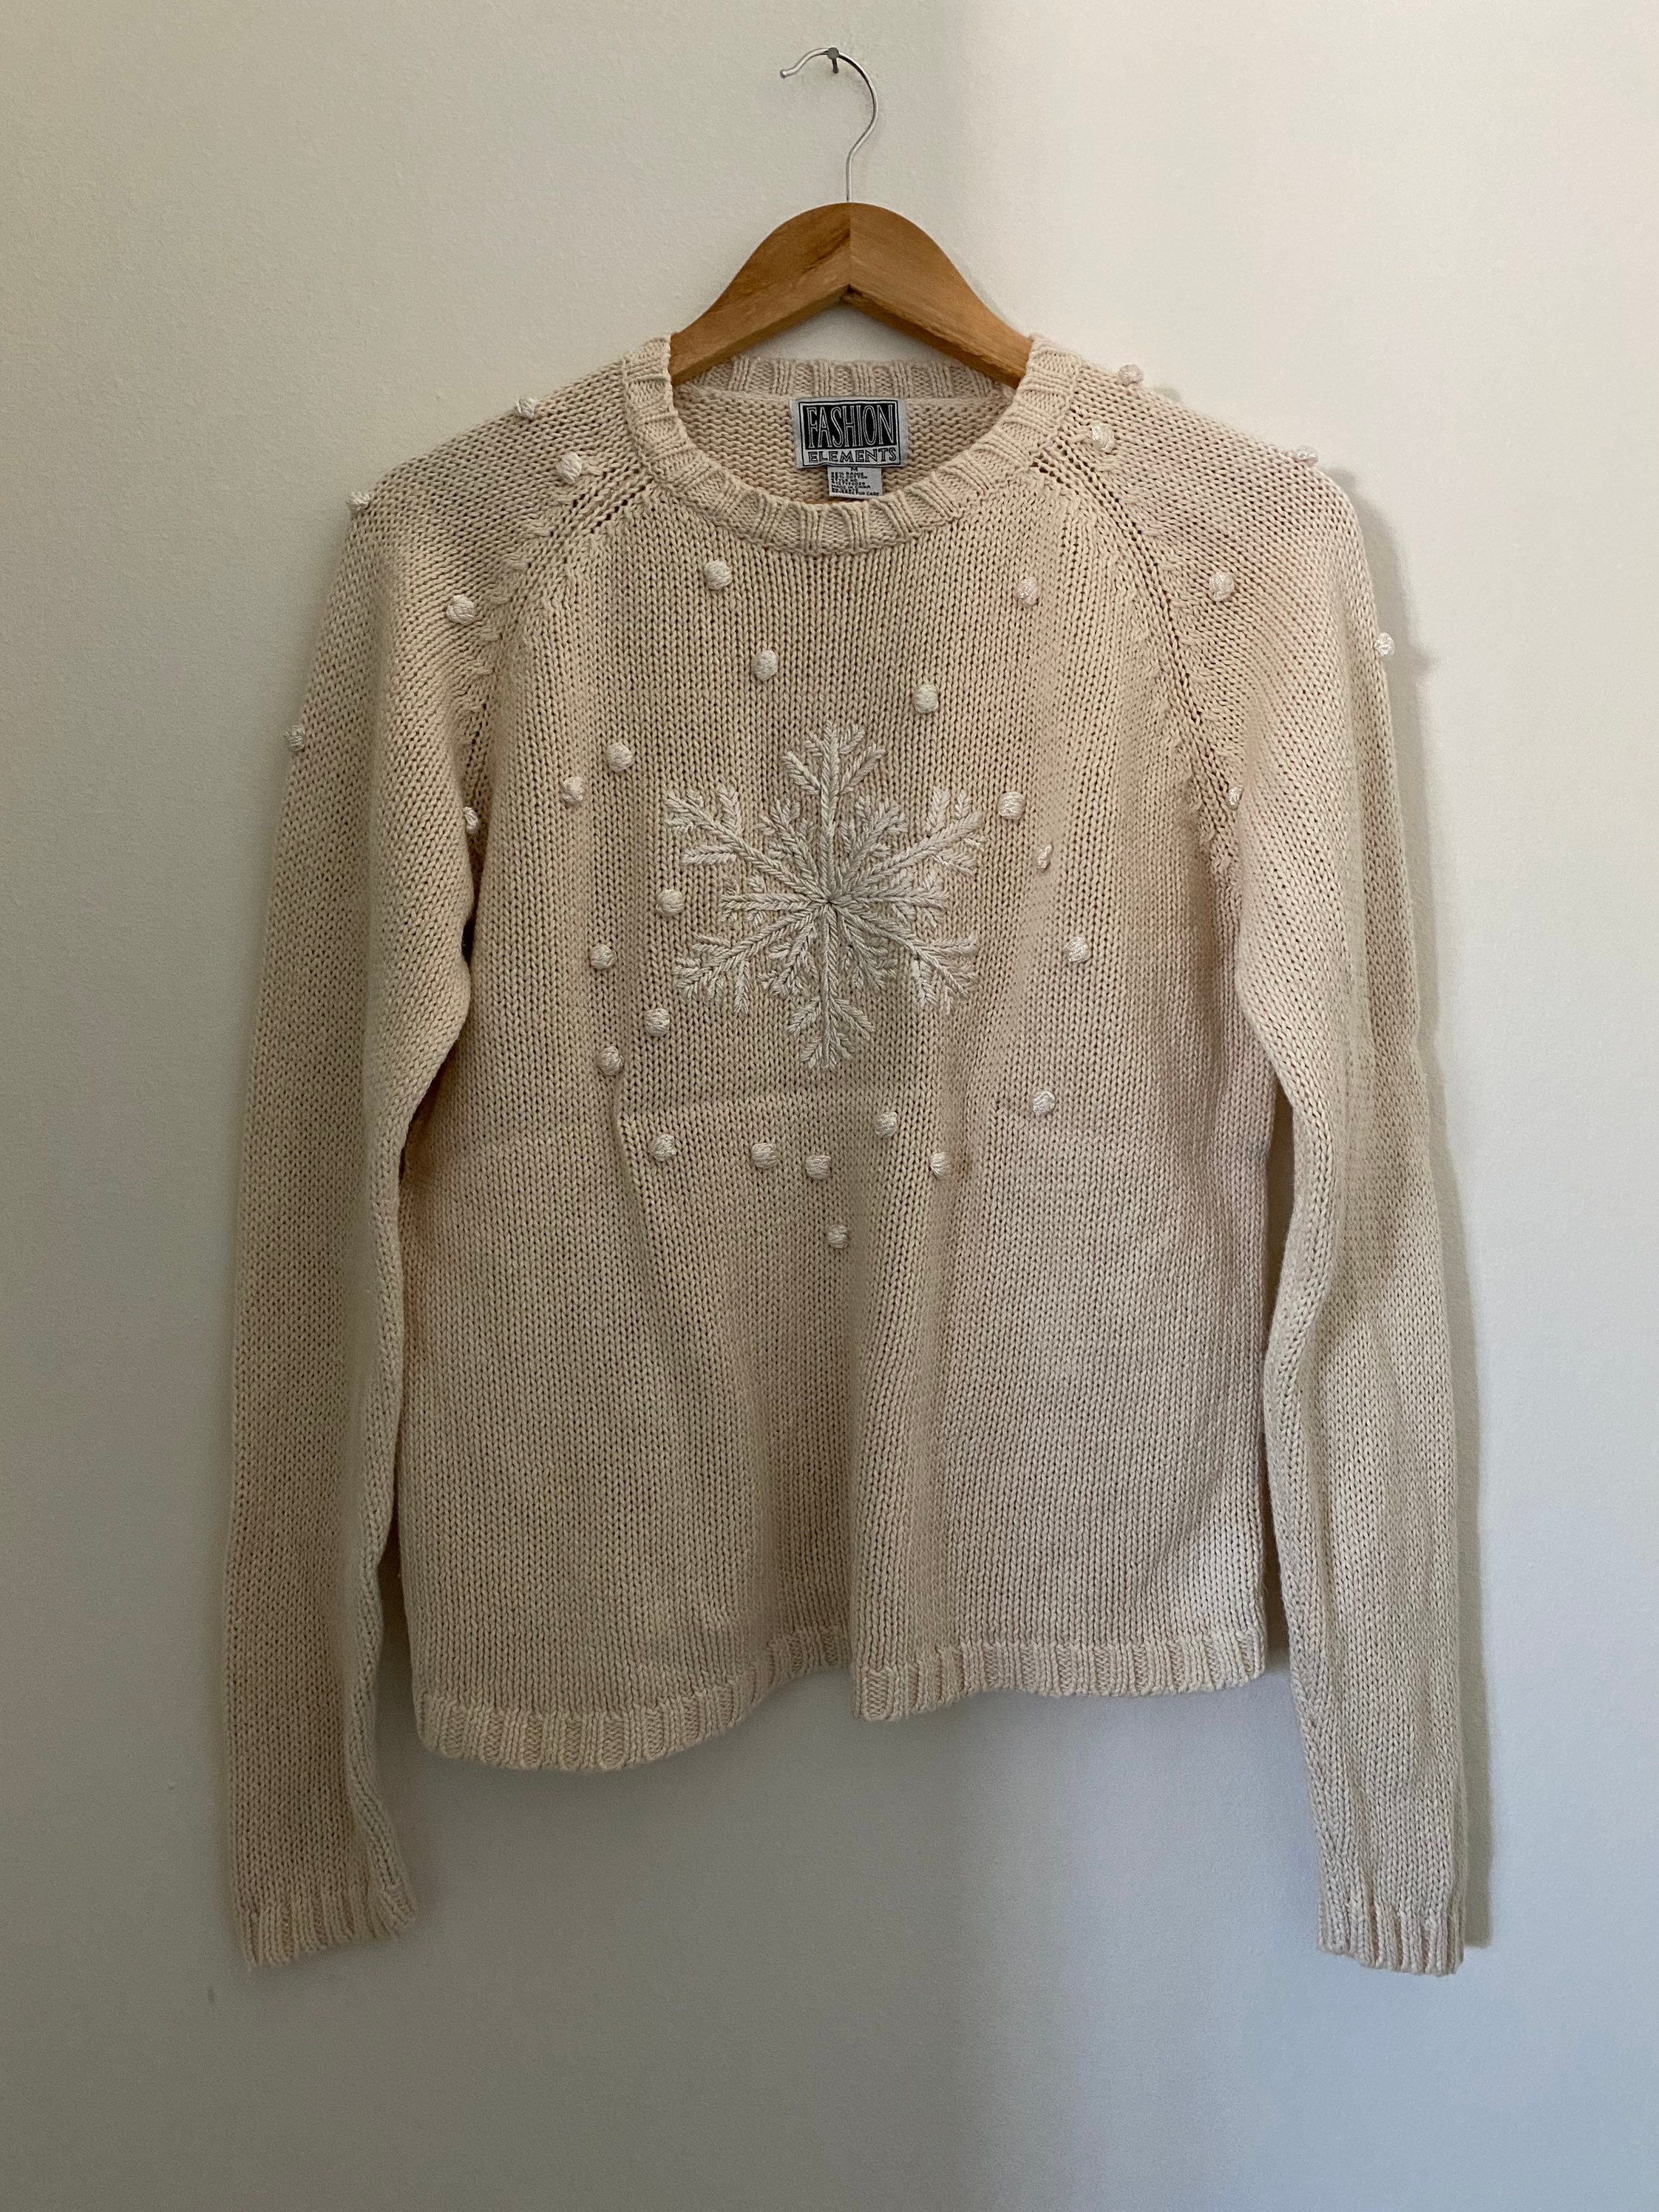 Vintage 90s Snowflake Holiday Ugly Sweater Size M - Etsy